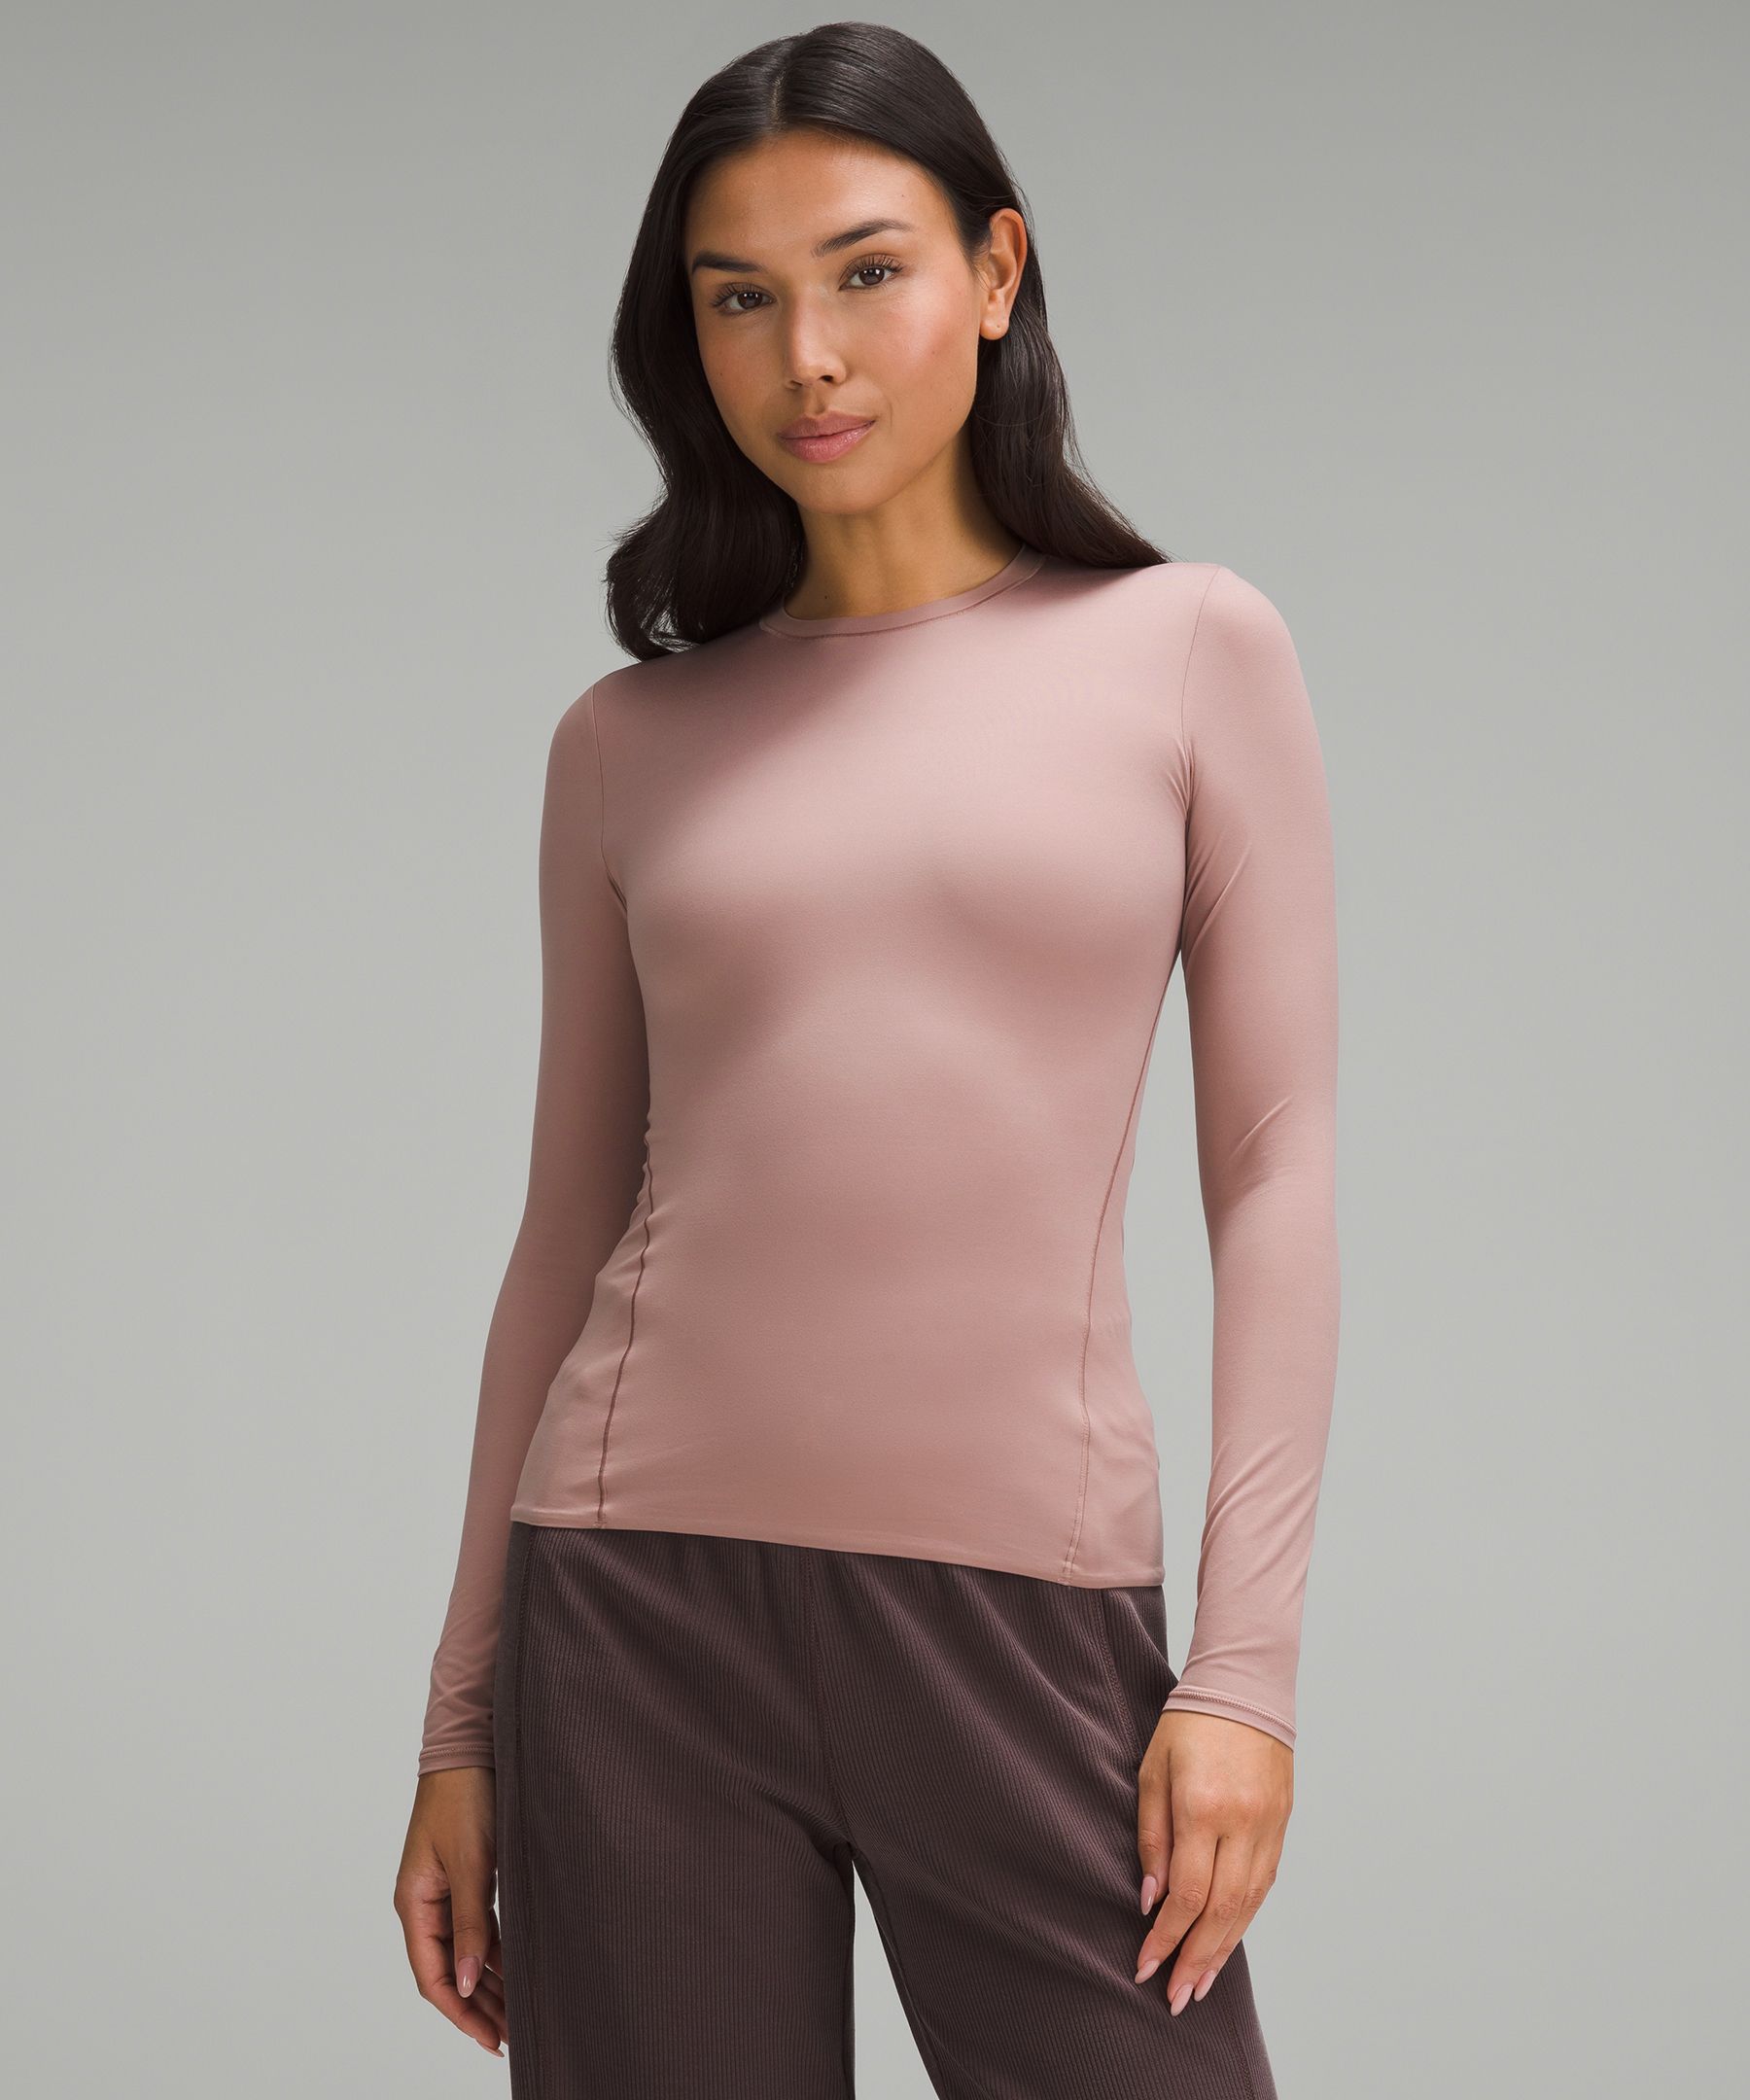 Track All It Takes Nulu Long-Sleeve Shirt - Twilight Rose - 6 at